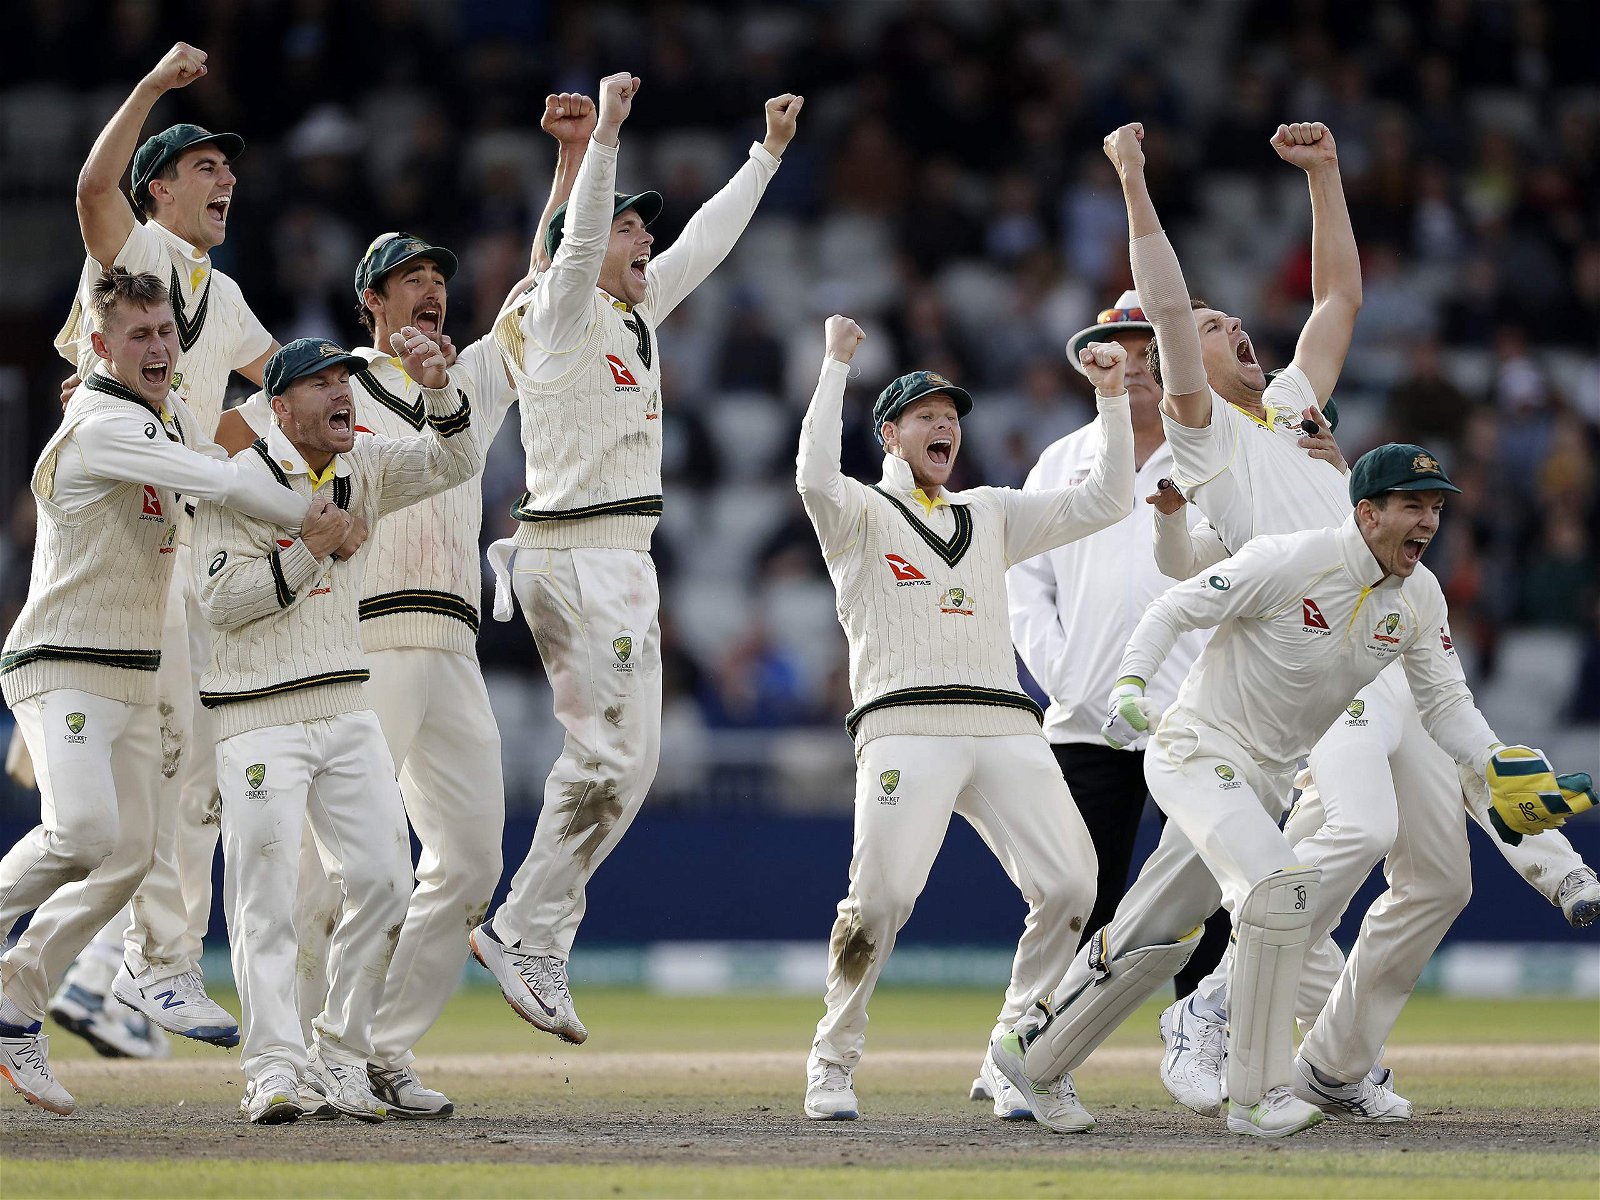 Michael Vaughan feels Australia are very close to beat England in their own backyard